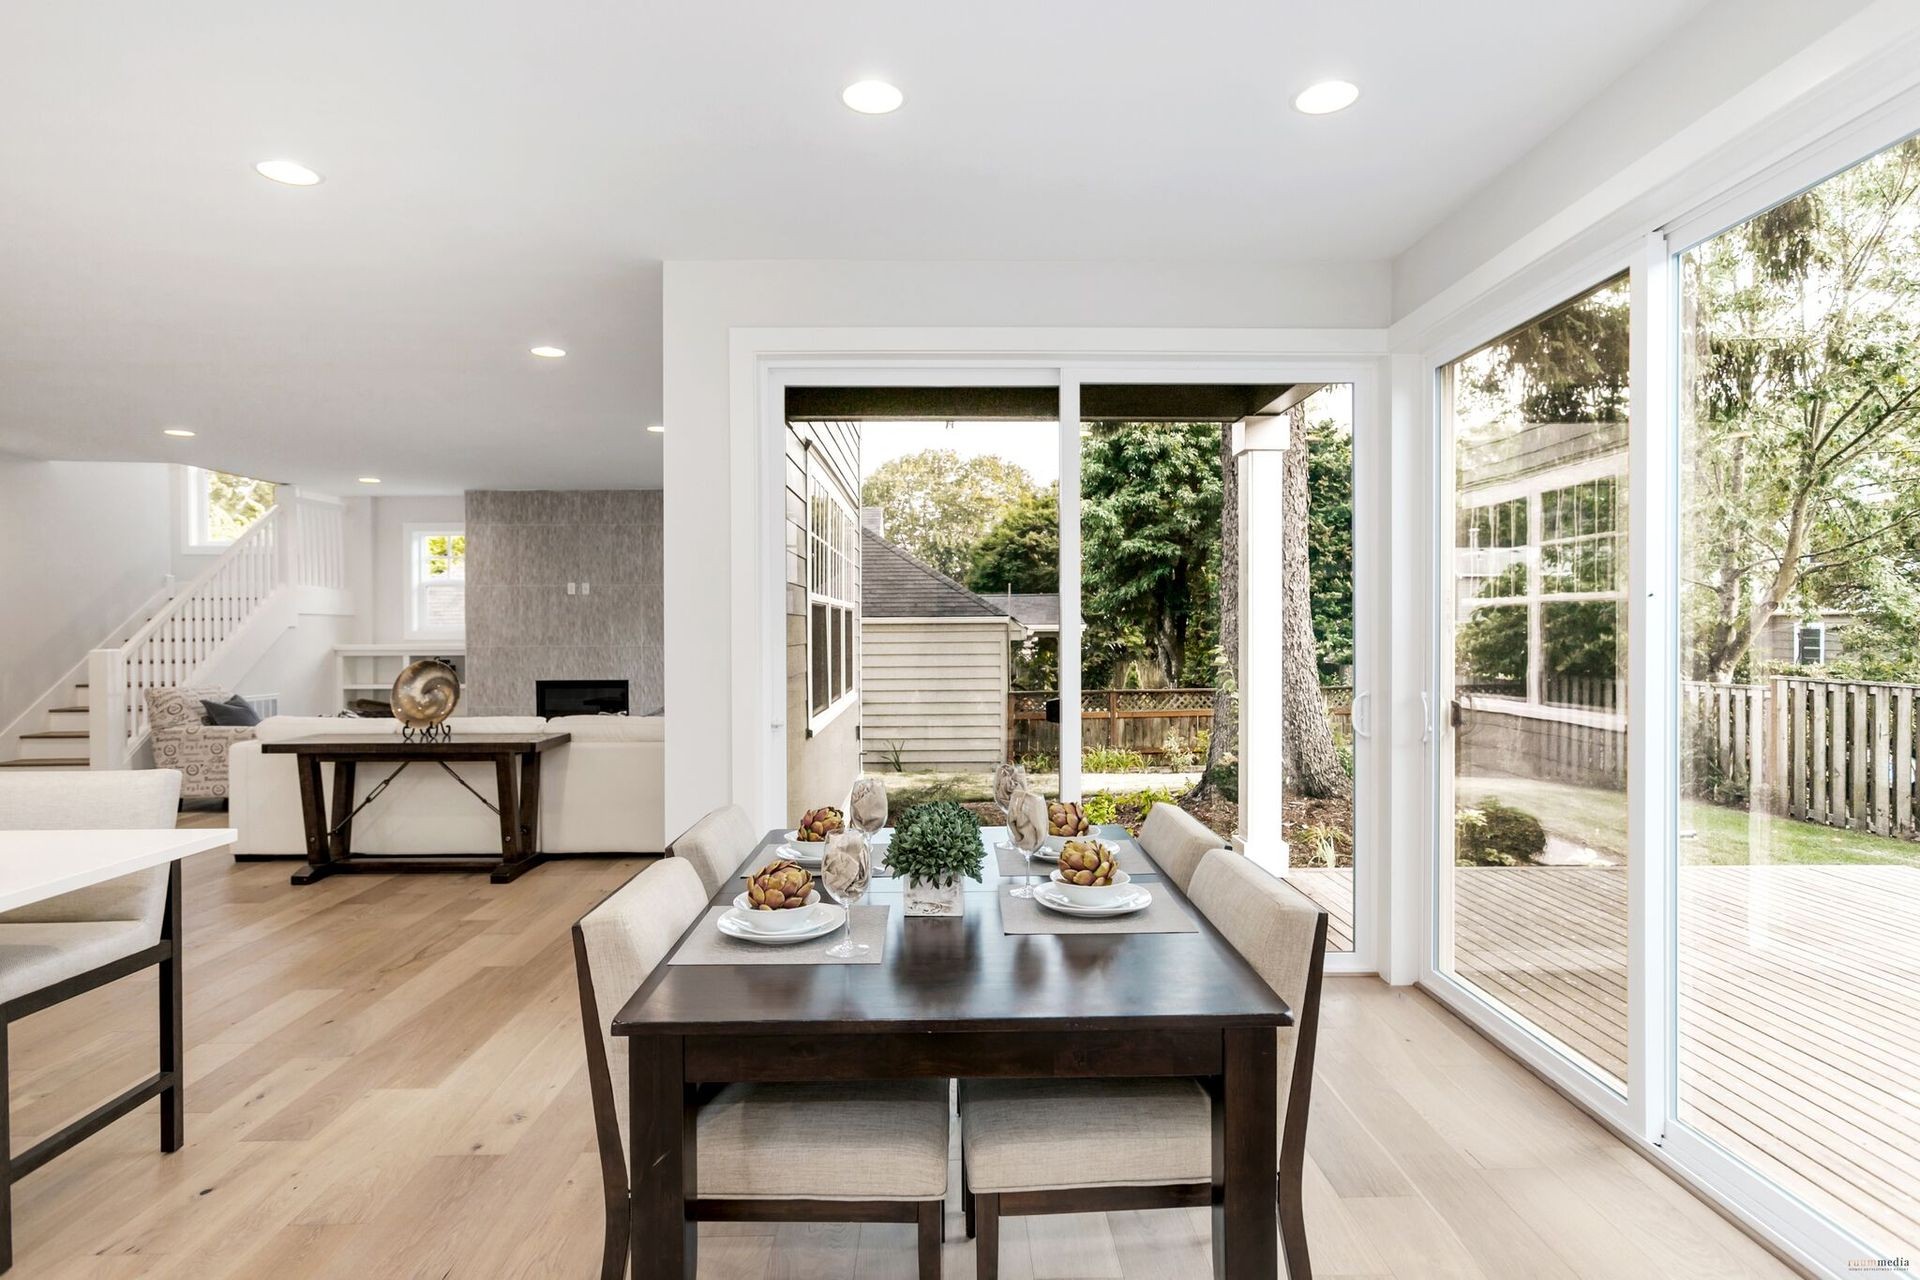 Spacious and modern dining room with natural light in a sustainable net-zero energy home, featuring elegant hardwood floors and contemporary design